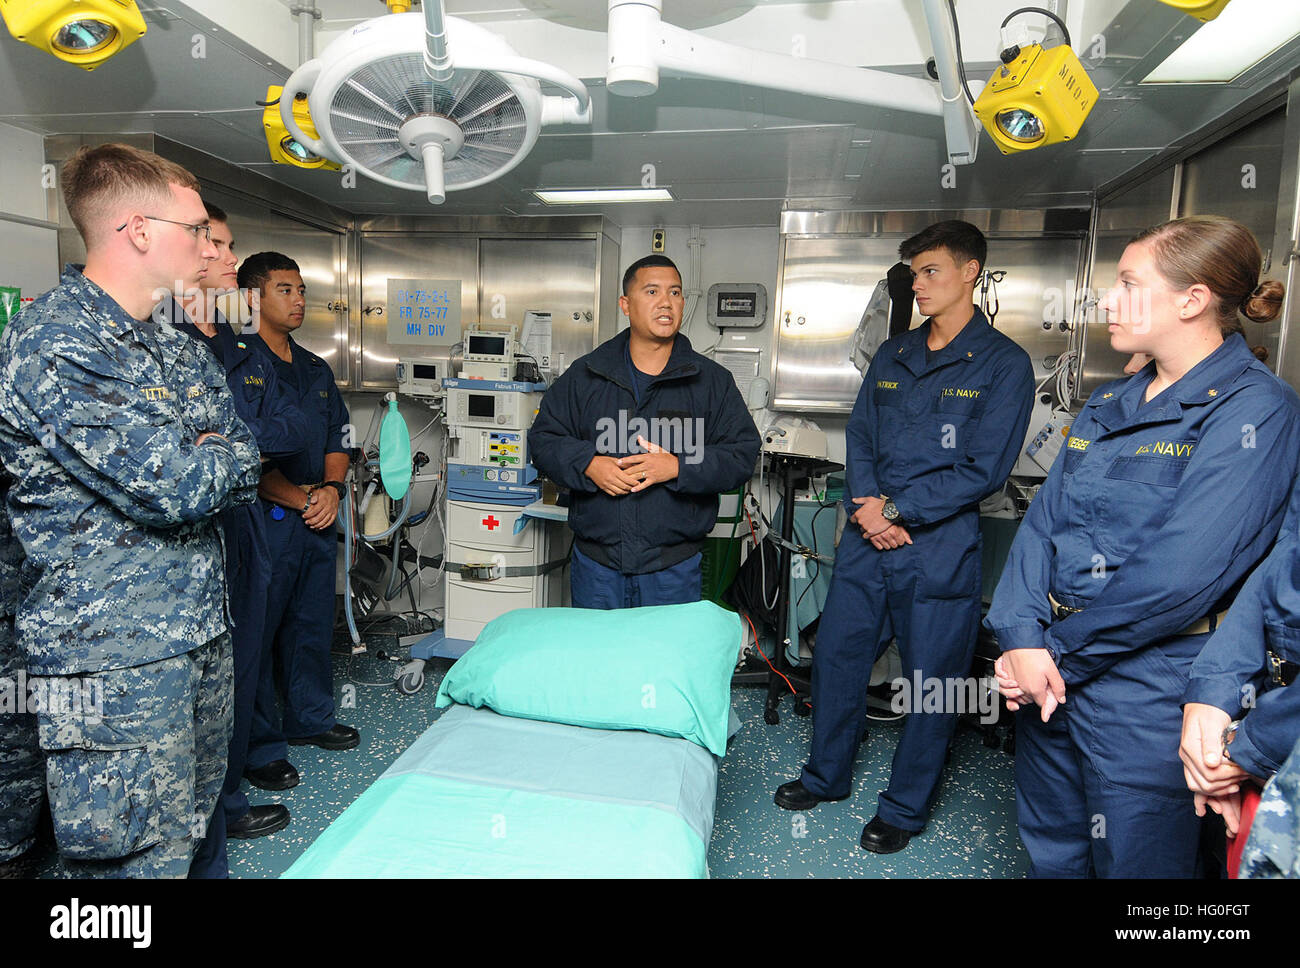 Hospital Corpsman 1st Class Augustine Torrez explains the role of the operating room aboard the amphibious assault ship USS Makin Island (LHD 8) to midshipmen from the U.S. Naval Academy. The group toured the ship's medical department during their 2012 professional training of midshipmen (PROTRAMID) program. Fifty-four midshipmen got underway with the crew of Makin Island to learn about naval surface operations and experience life at sea. (U.S. Navy photo by Mass Communication Specialist 1st Class David McKee) USS Makin Island Maiden deployment 120725-N-FH966-065 Stock Photo